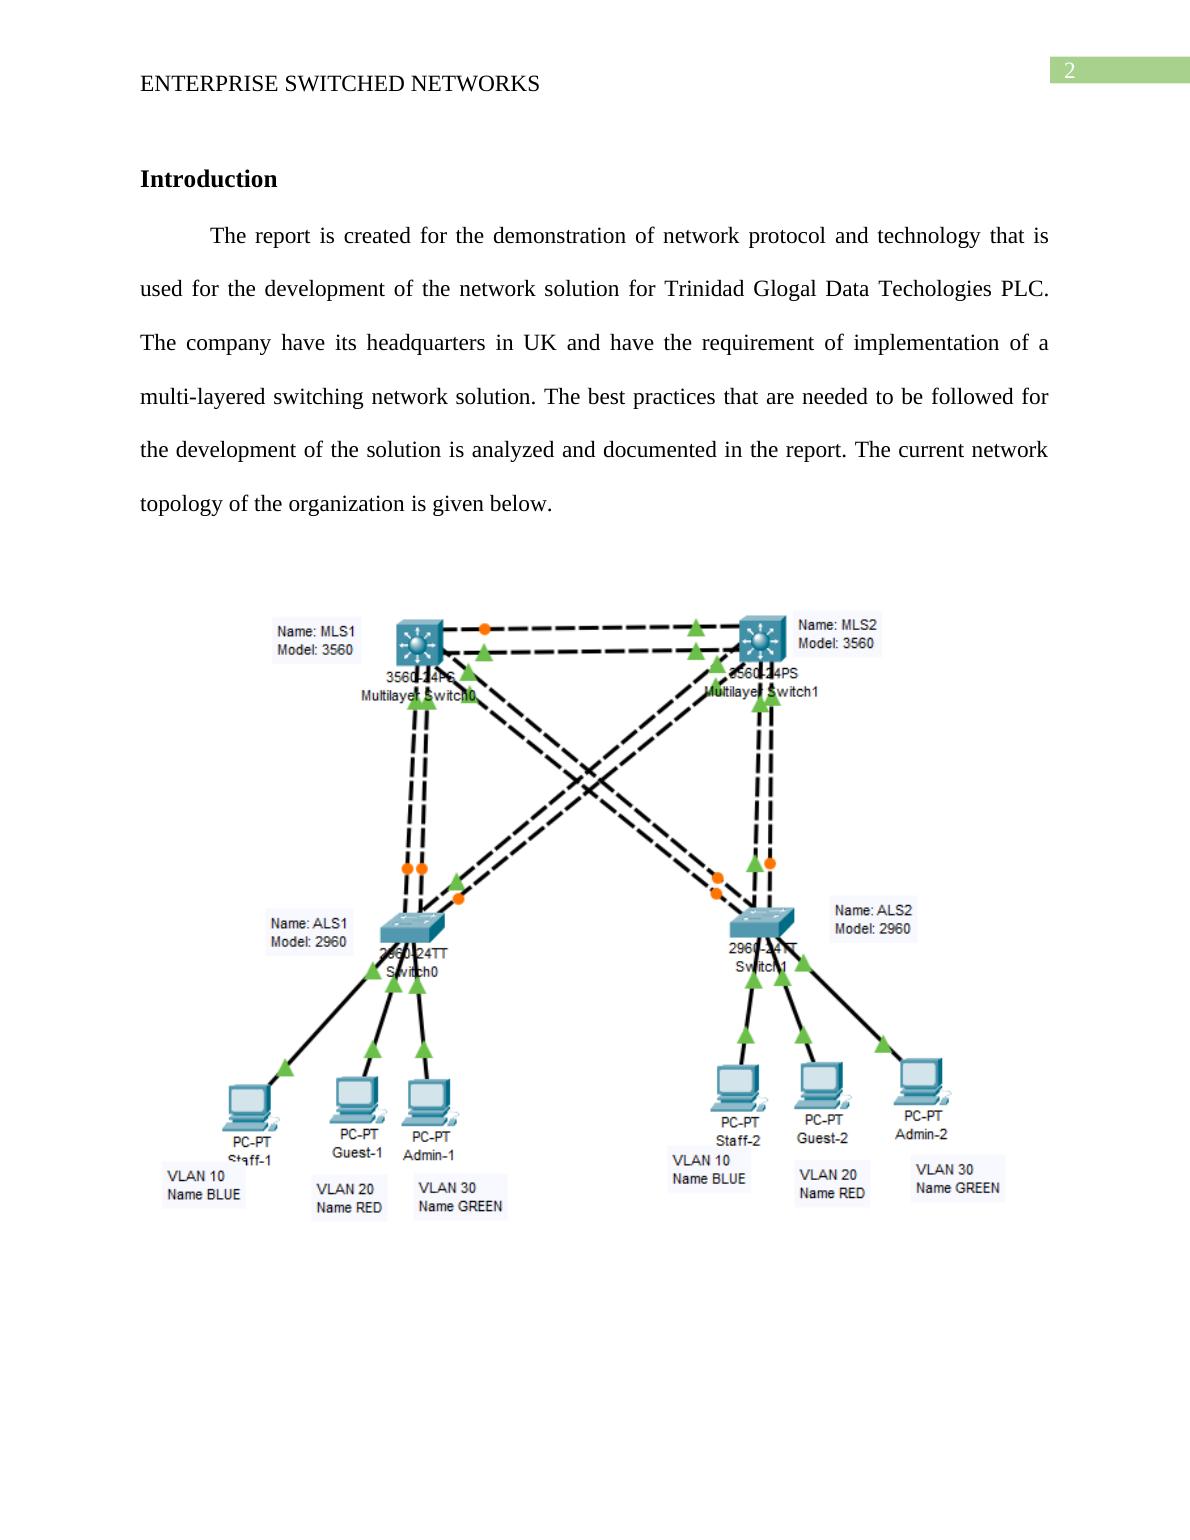 Introduction to Enterprise SWITCHED NETWORKS_3